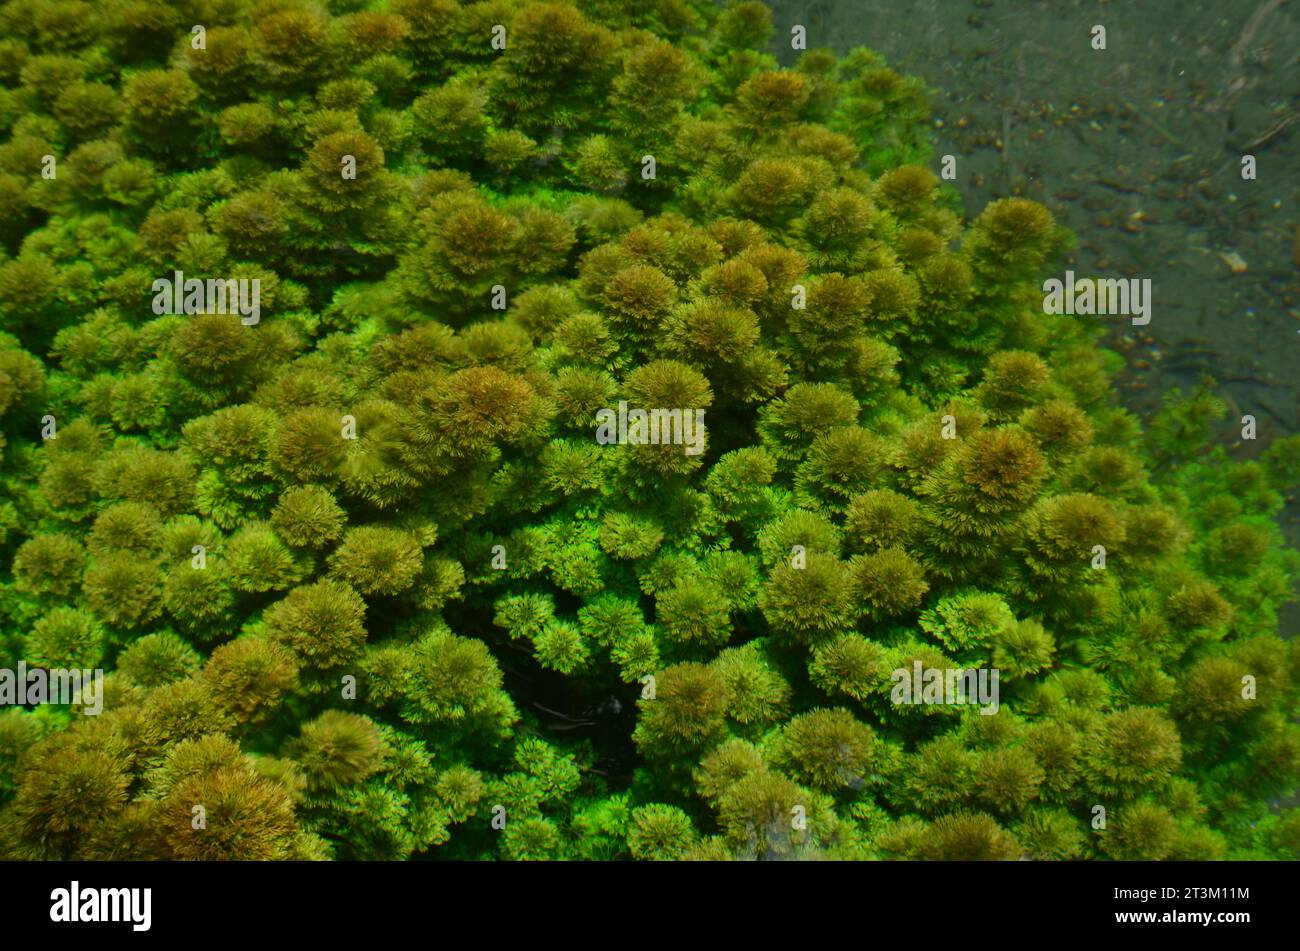 Limnophila sessiliflora has green hair-shaped leaves, this underwater plant grows easily in areas with sufficient sunlight. Stock Photo